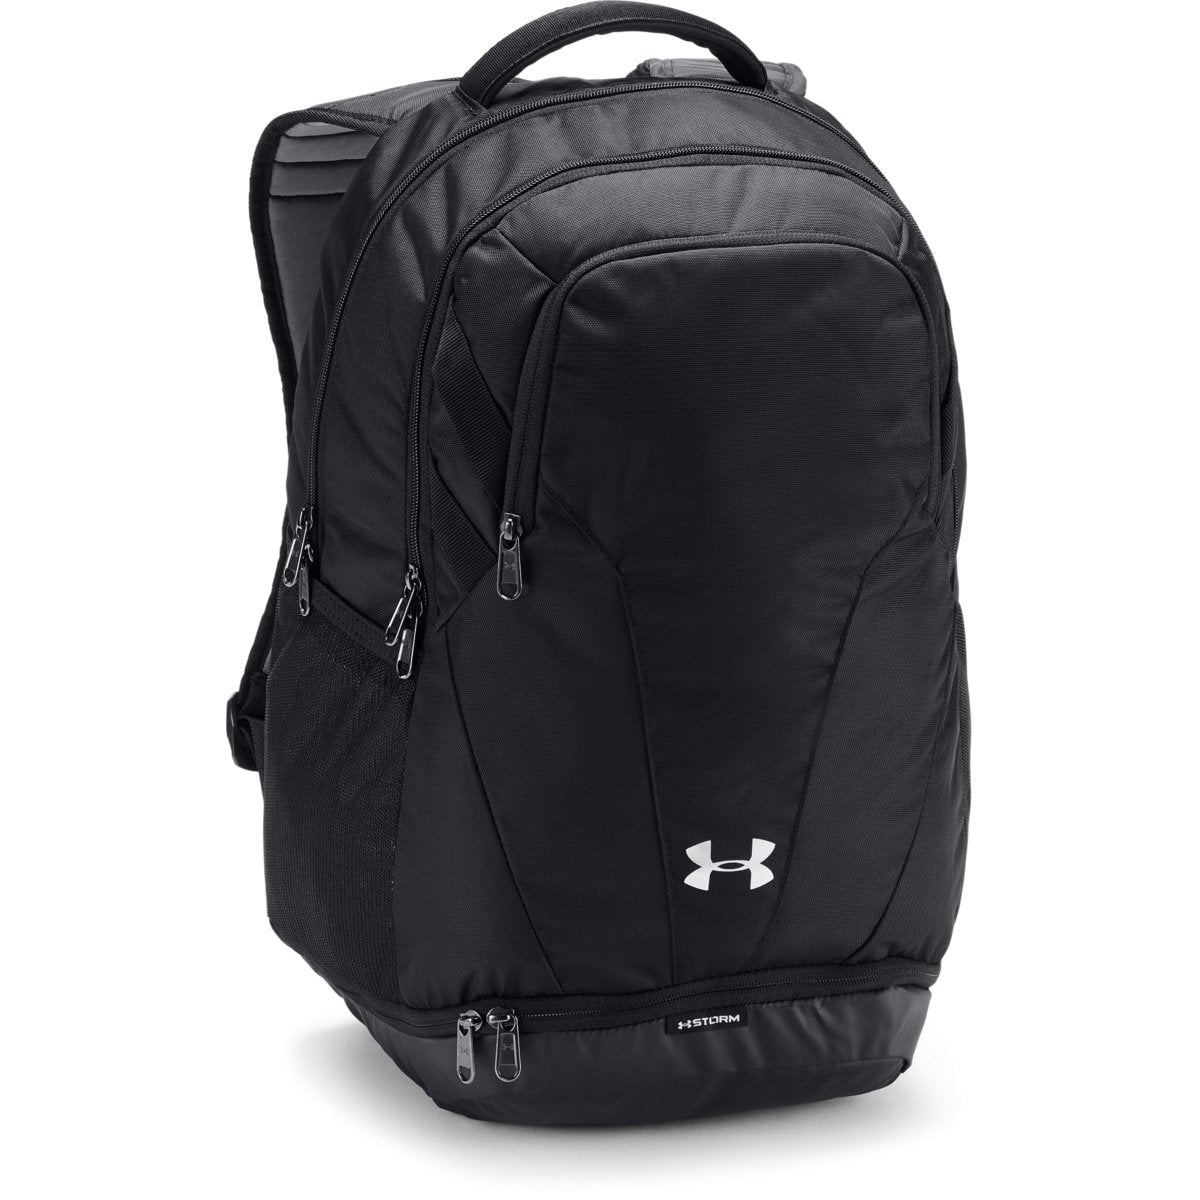 Under Armour 1342651 Hustle 4.0 Backpack Teal Vibe - VIP Outlet